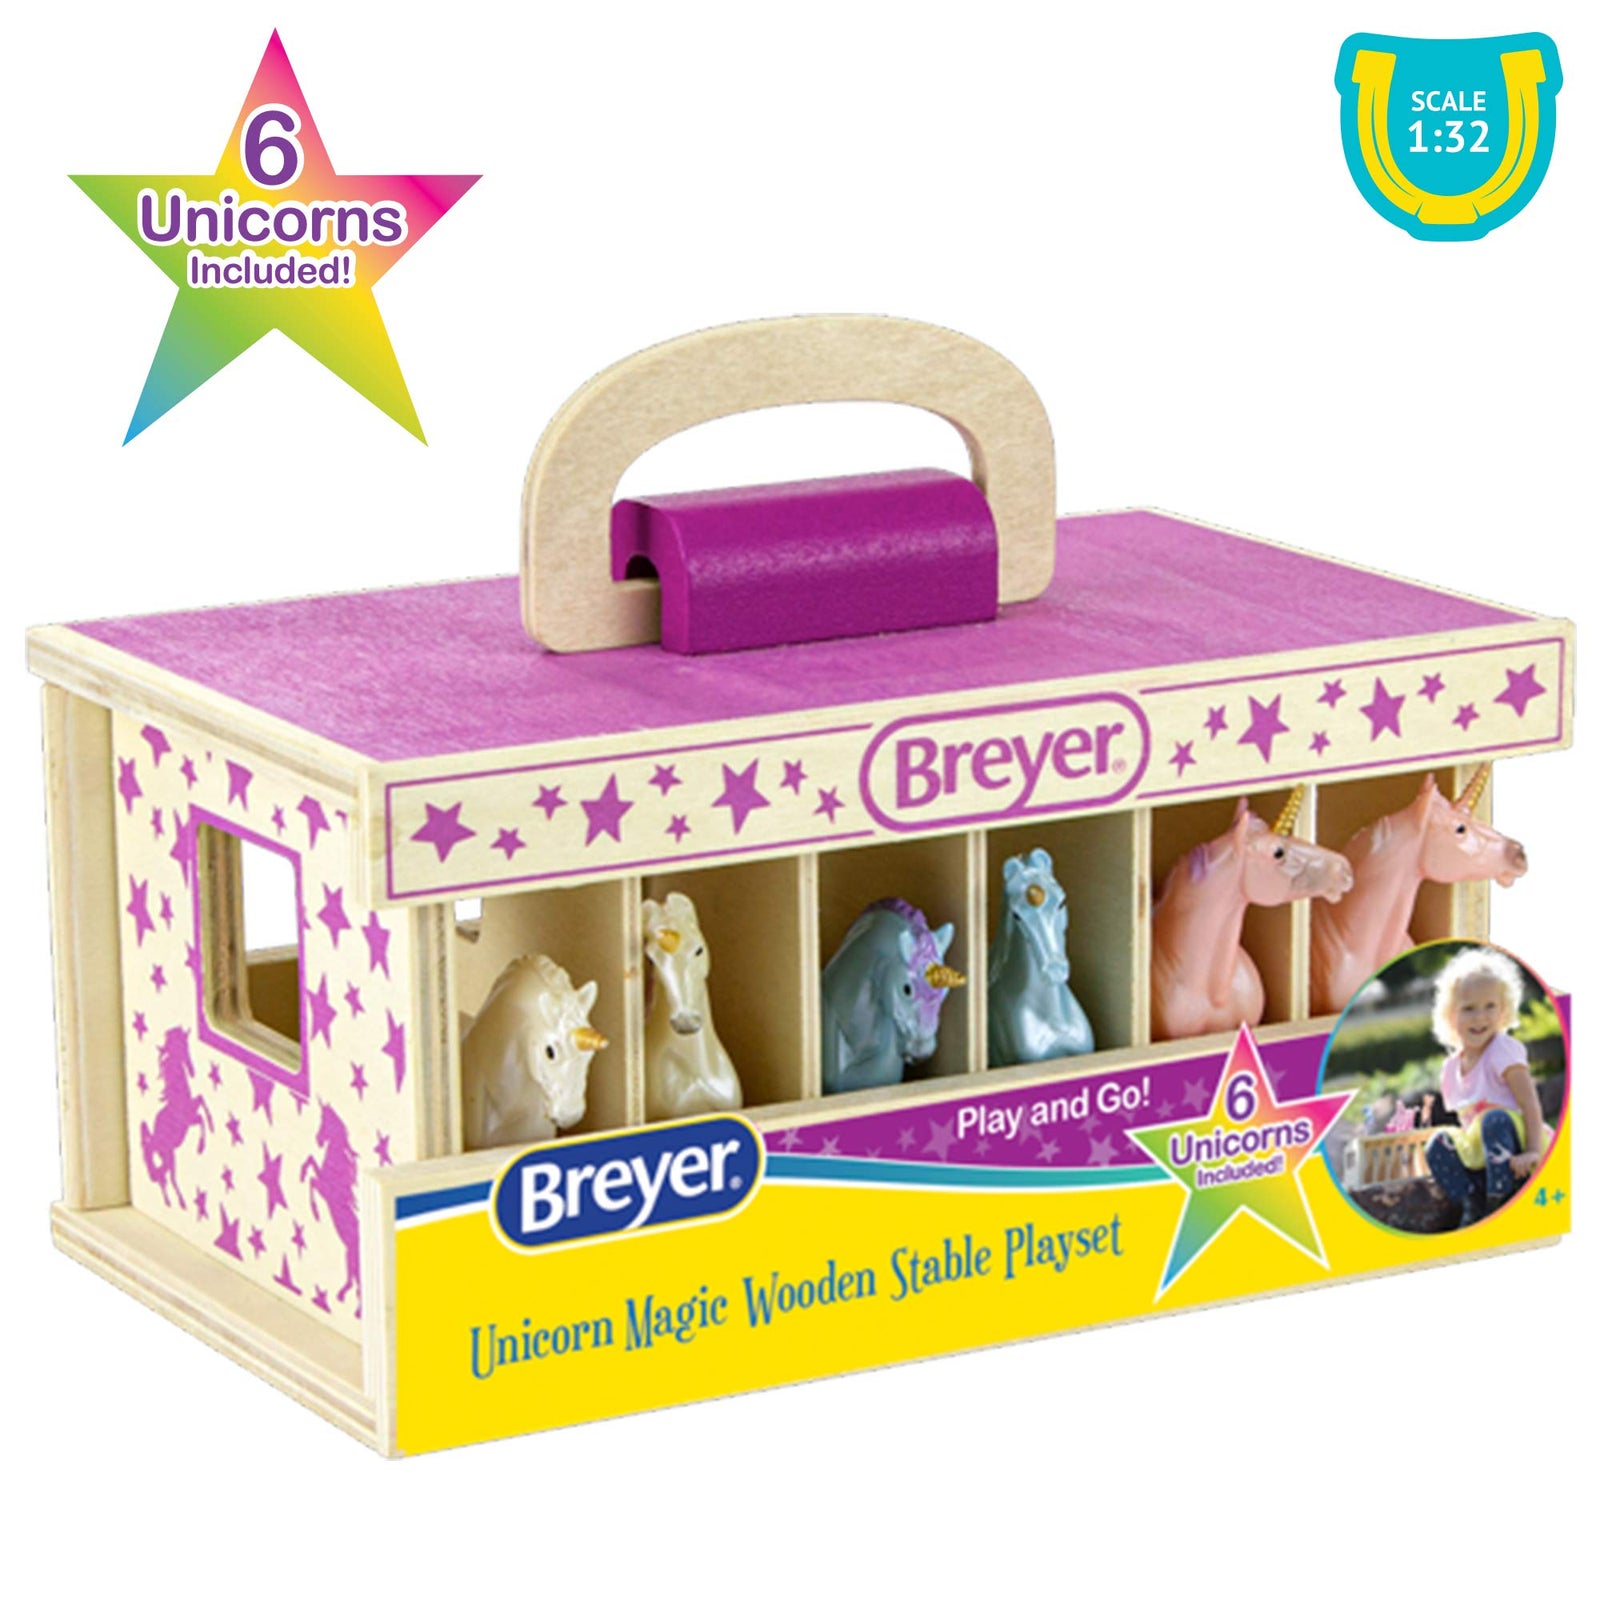 Breyer Horses Unicorn Magic Wooden Stable Playset with 6 Unicorns | 6 Piece Playset | 6 Stablemates Unicorns Included | 6” H x 9” L x 2.5” D | 1:32 Scale | Model #59218, Multicolor